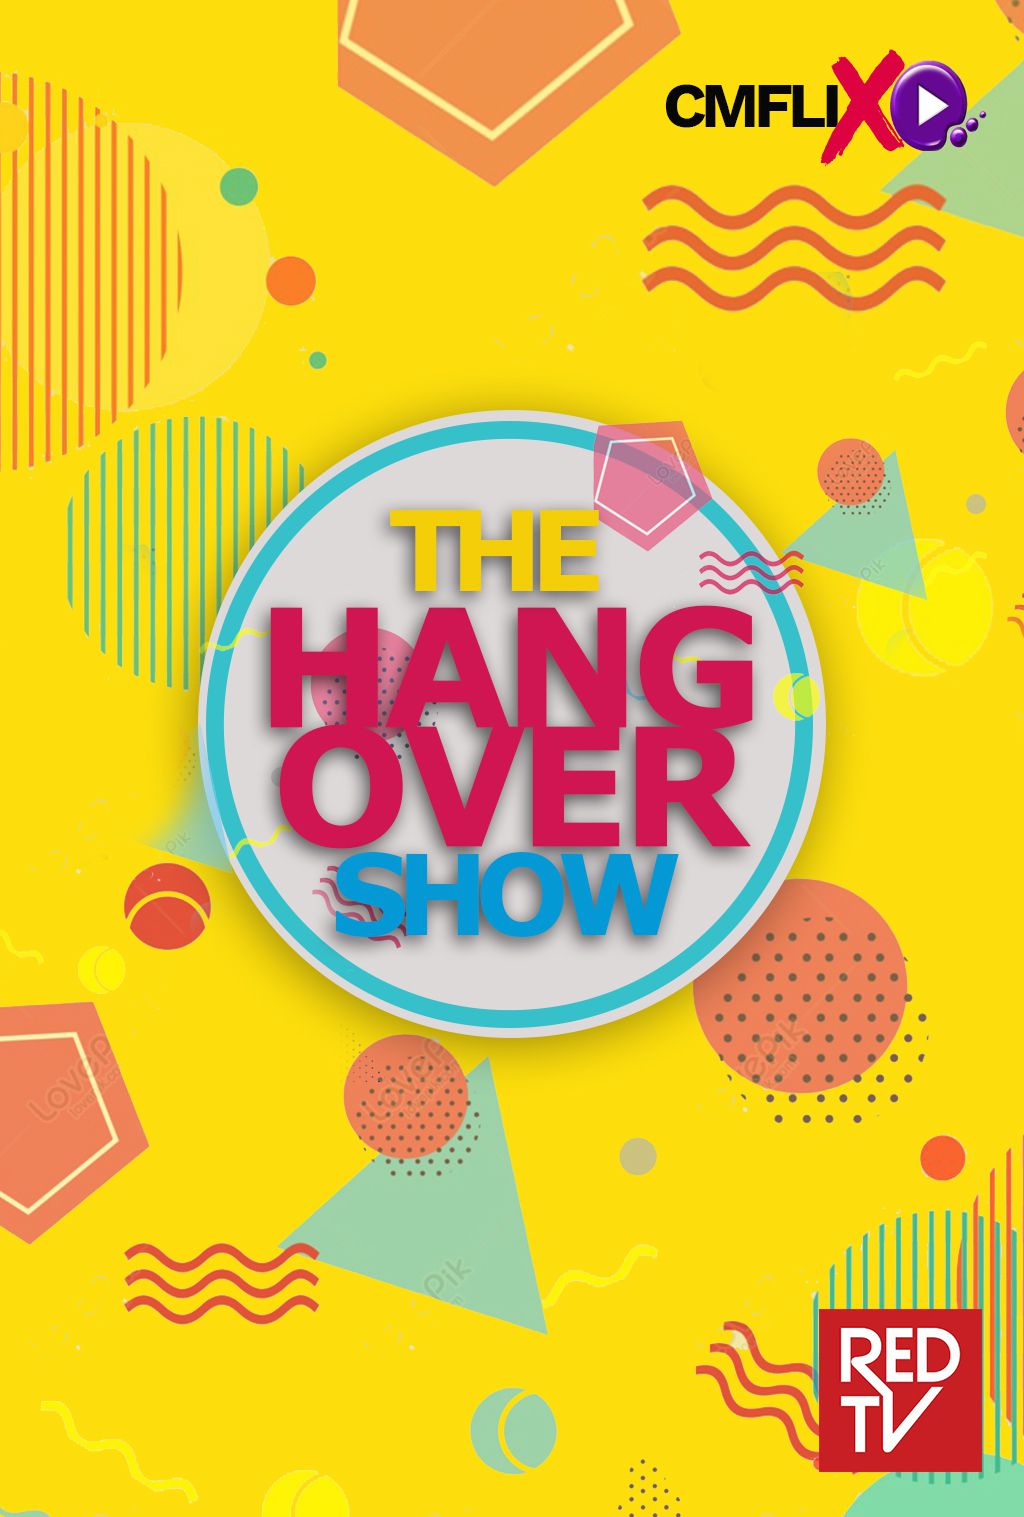 THE HANGOVER SHOW